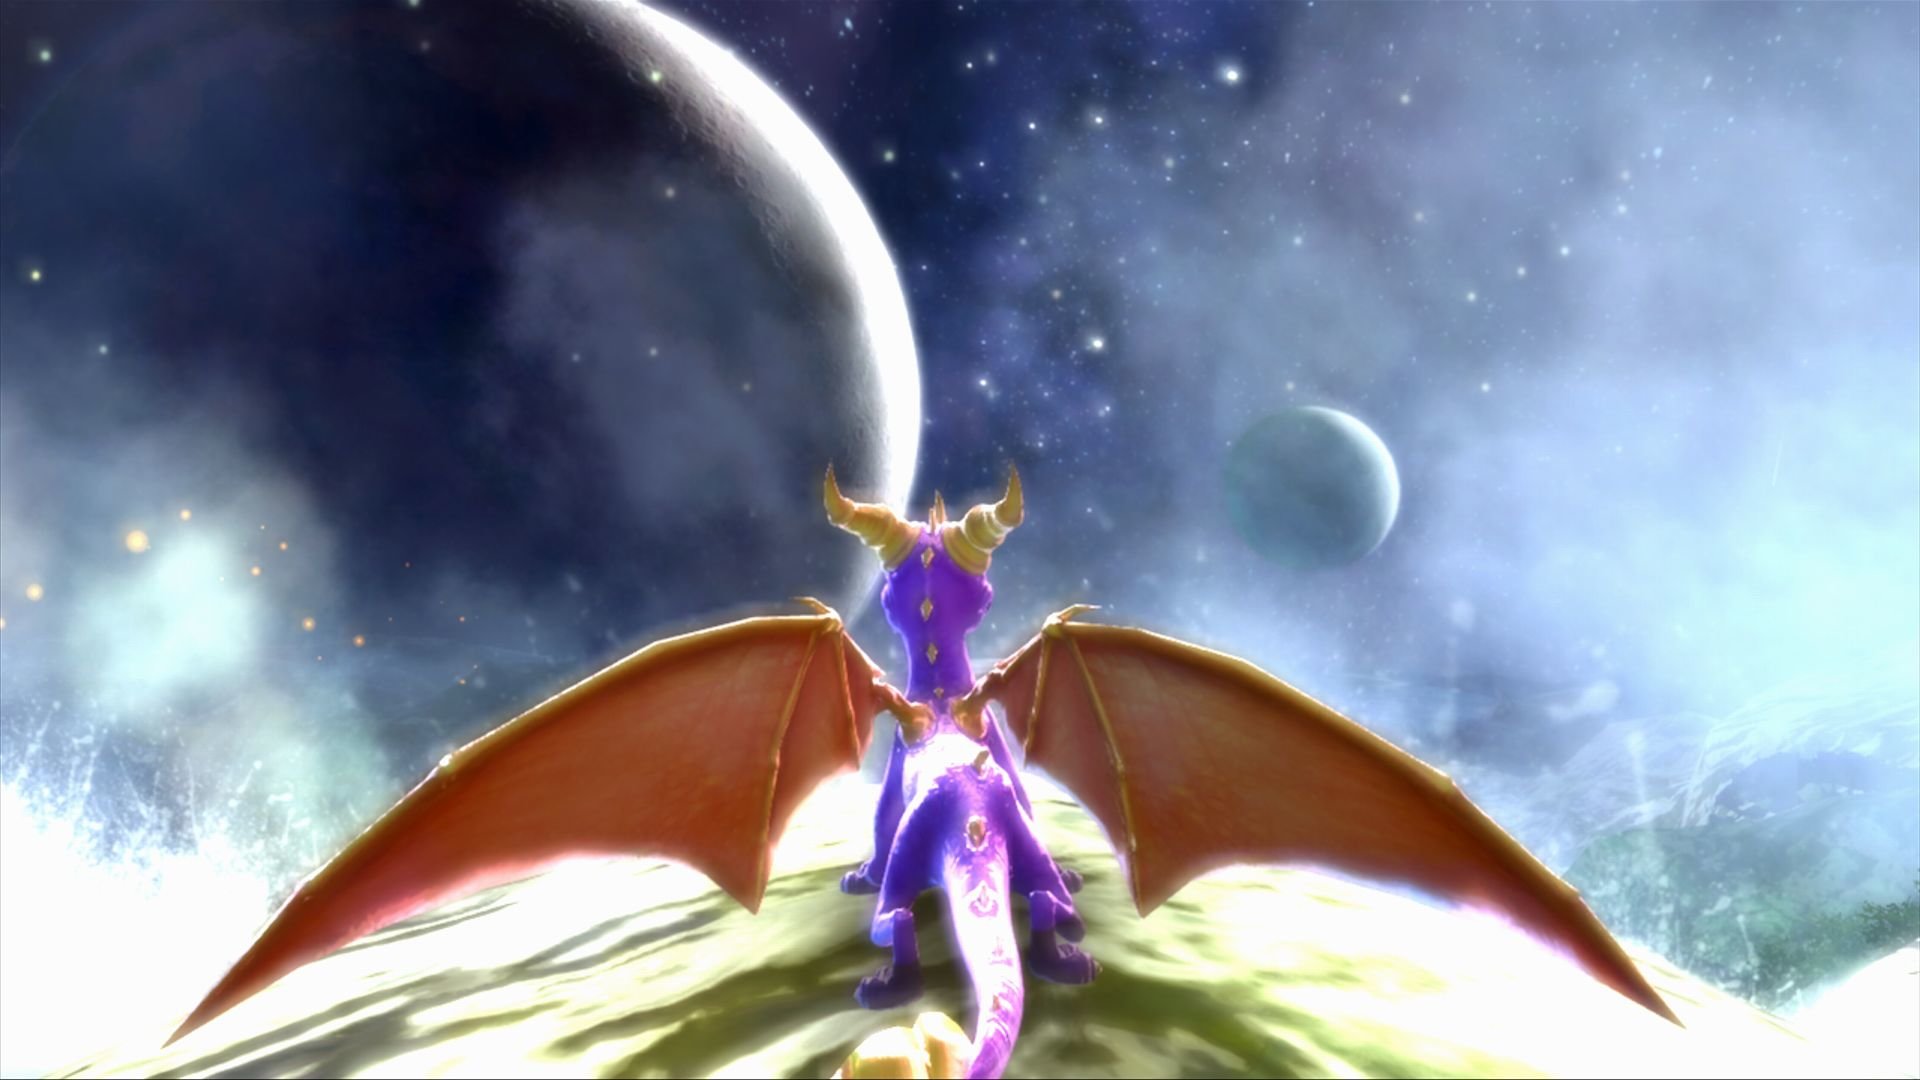 Best Spyro The Dragon wallpaper ID:231558 for High Resolution hd 1920x1080 computer